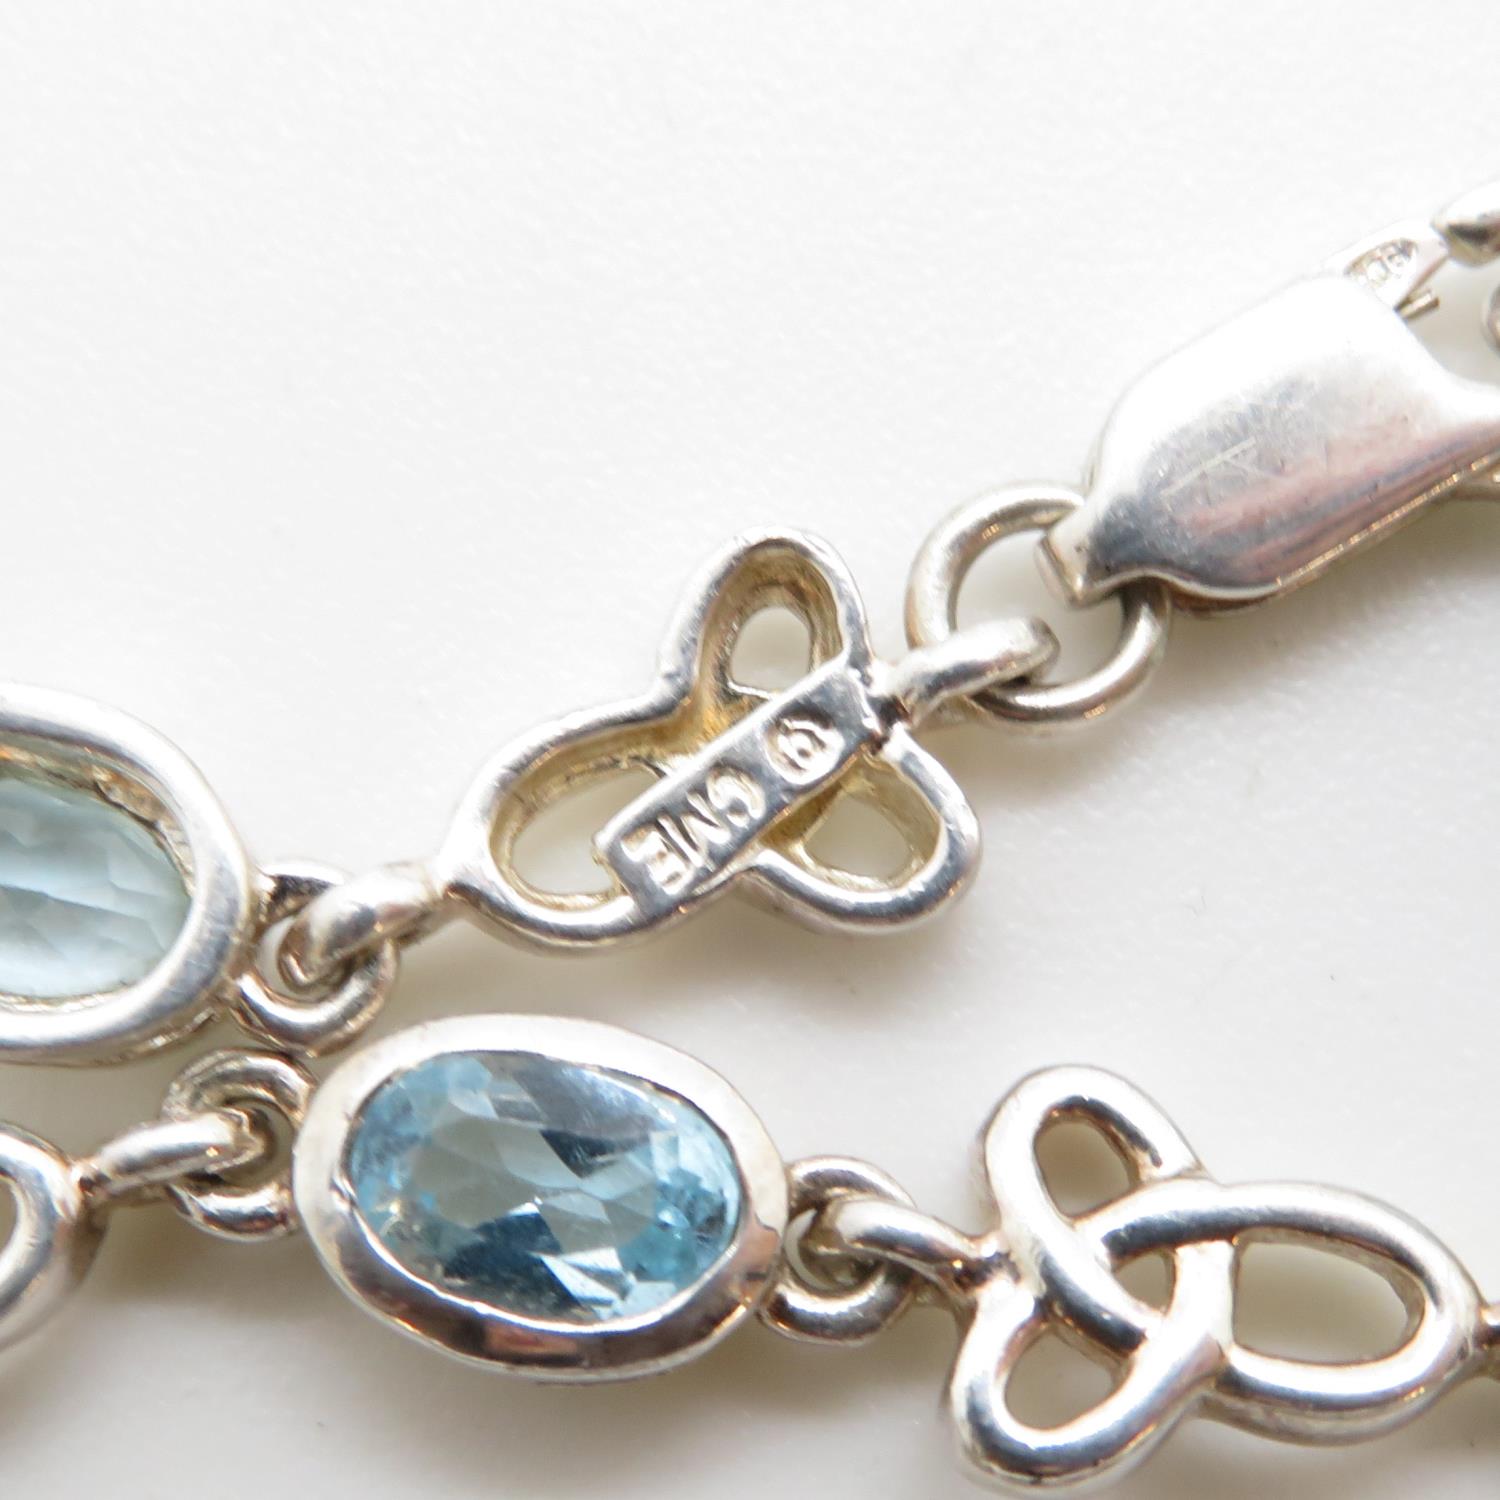 2x Celtic silver bracelet set with oval blue topaz stones matching pair fully HM 7.5" 20g - Image 4 of 4